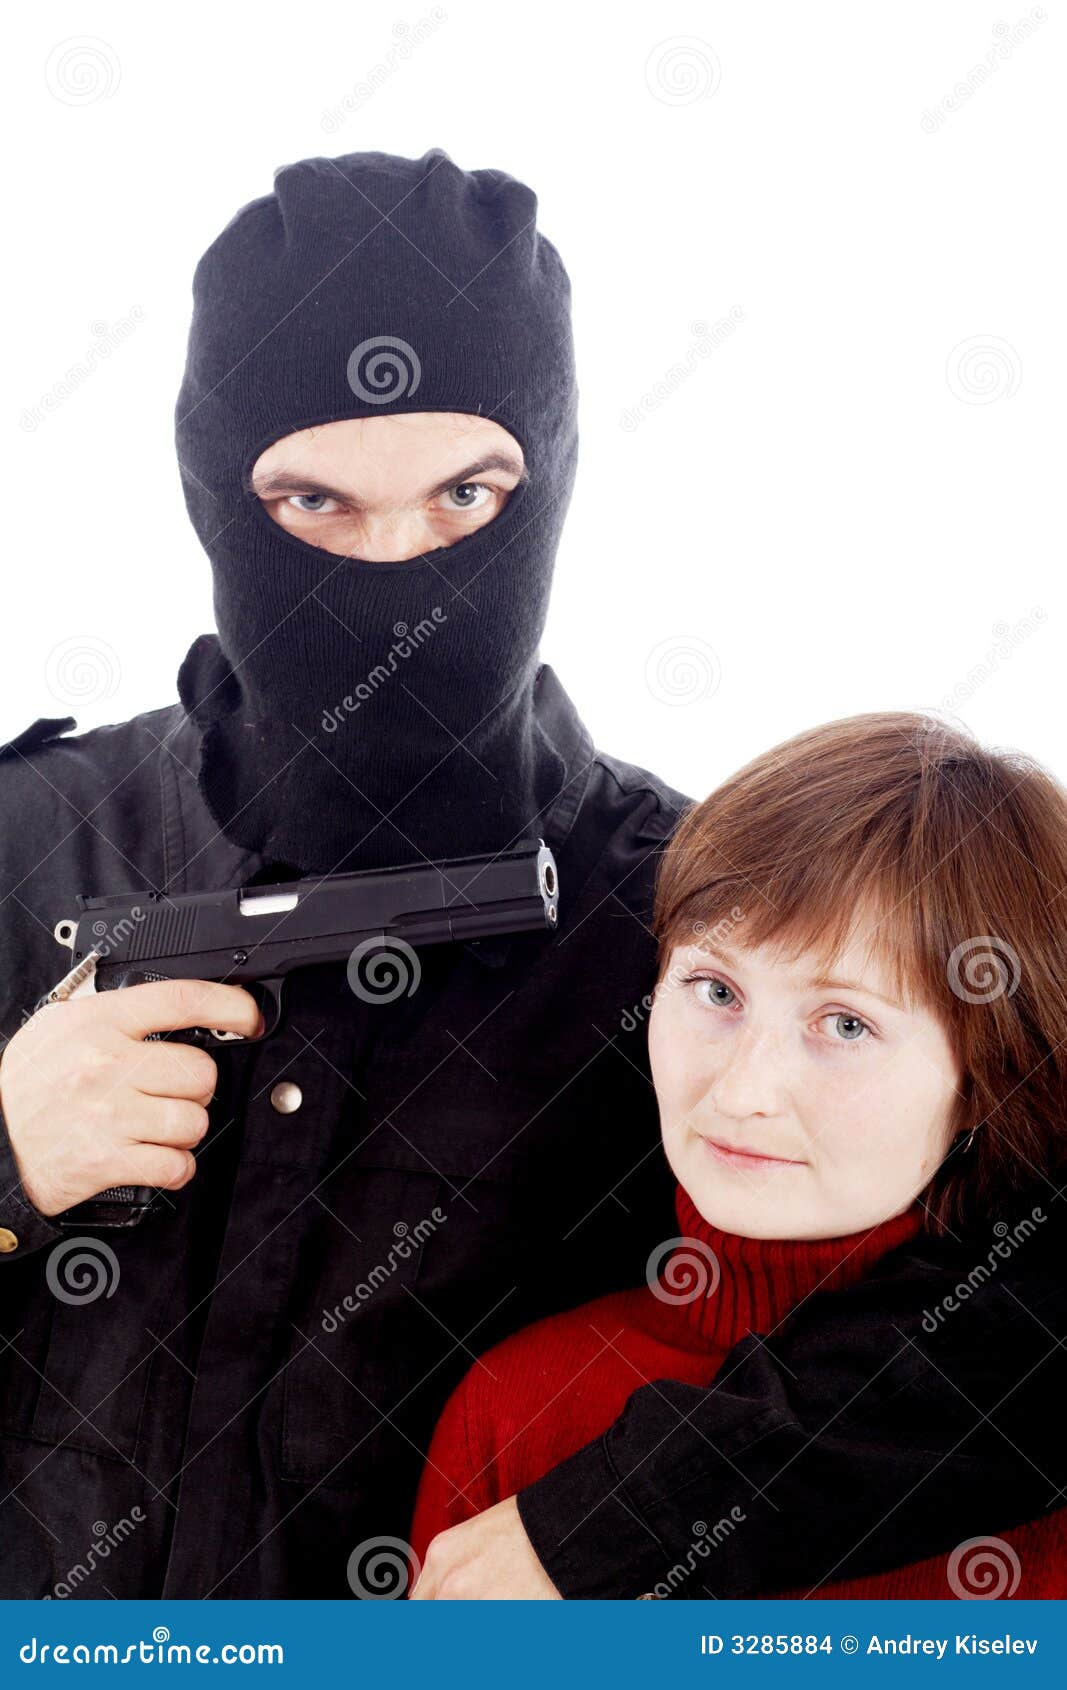 Kidnap stock photo. Image of nose, assault, clothing ...